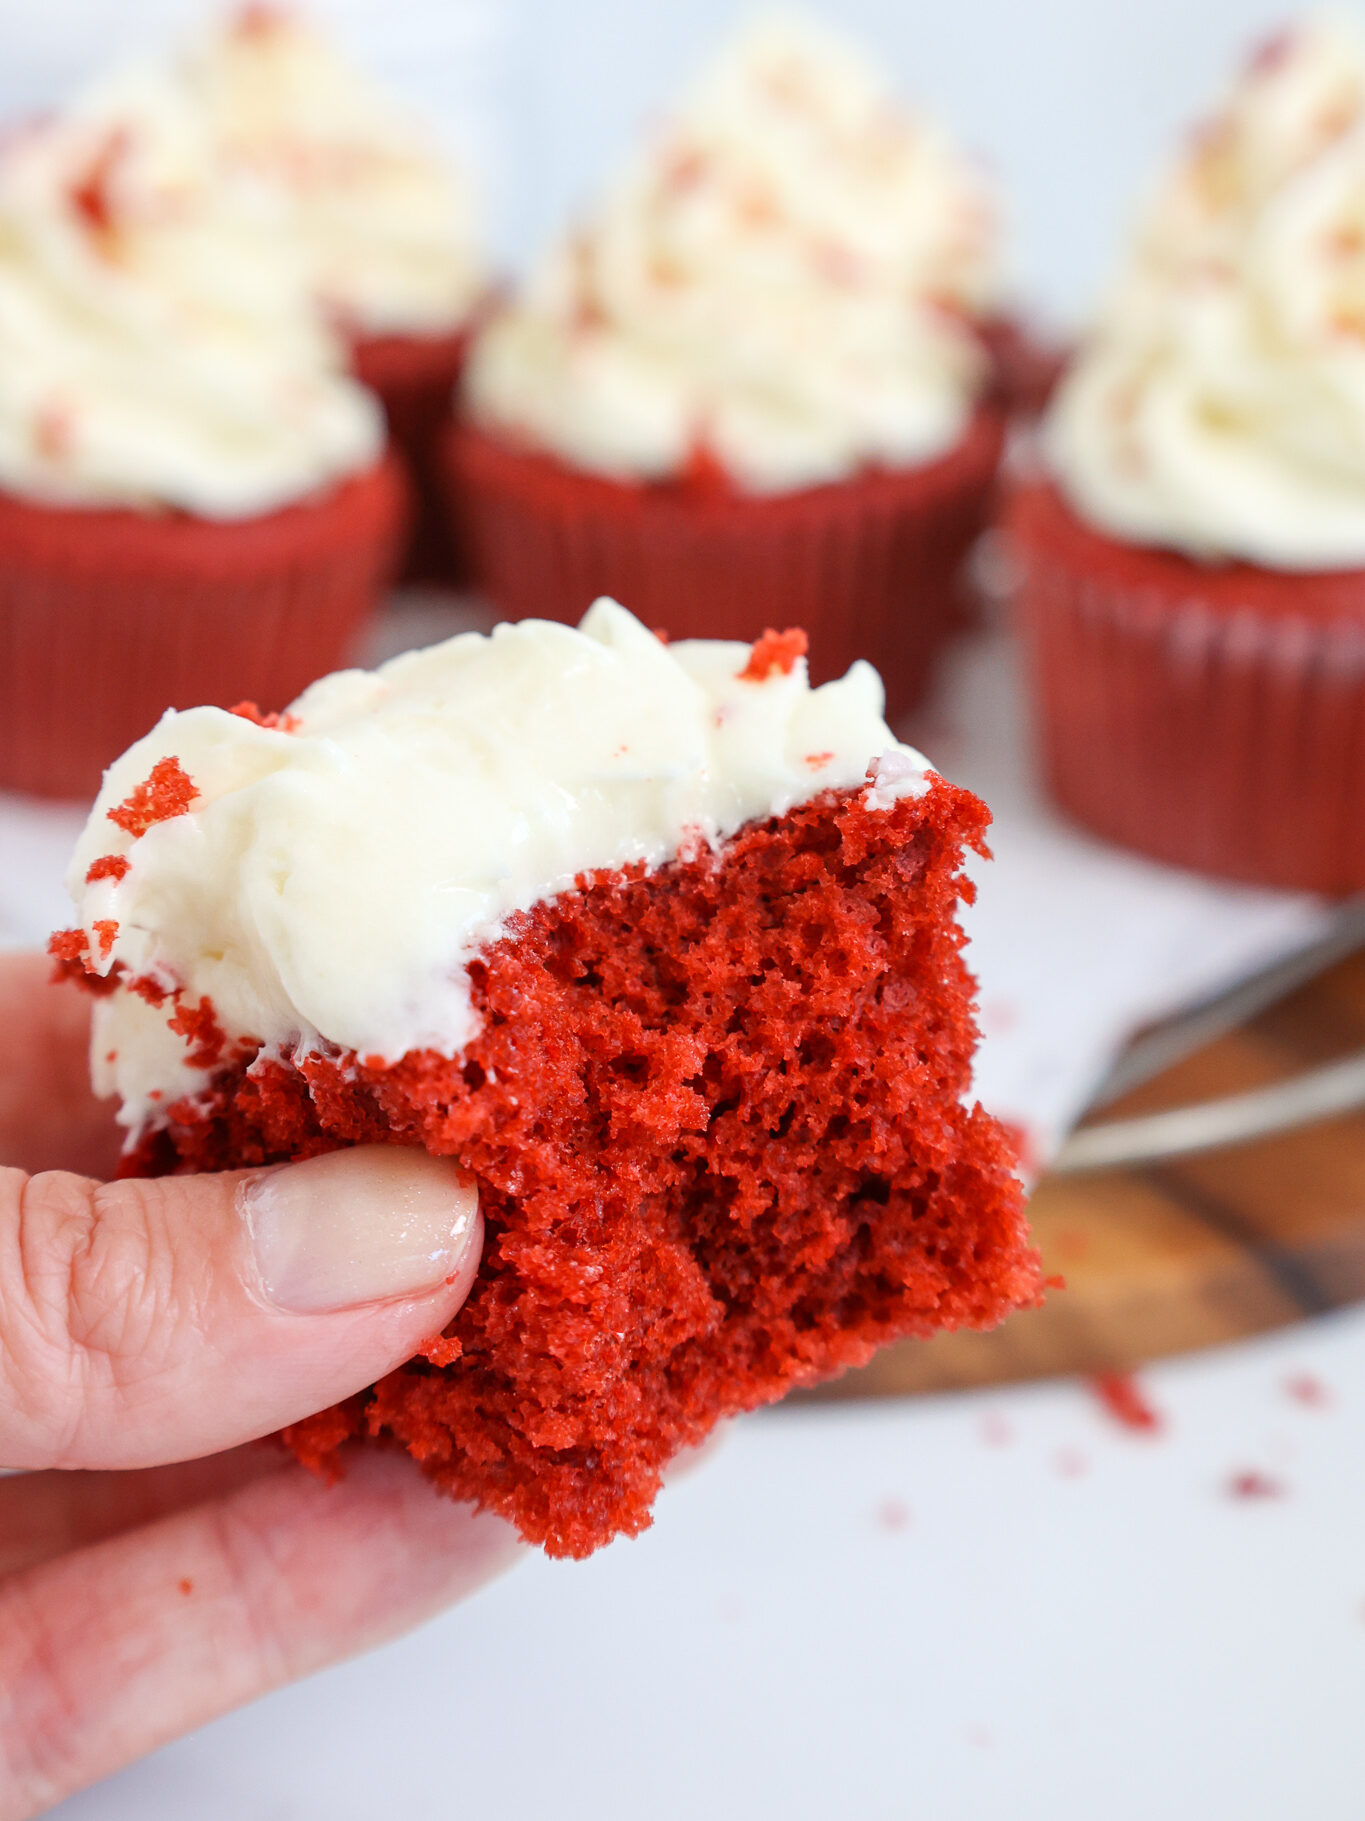 image of a red velvet cupcake that's been cut into to show how tender and soft it is